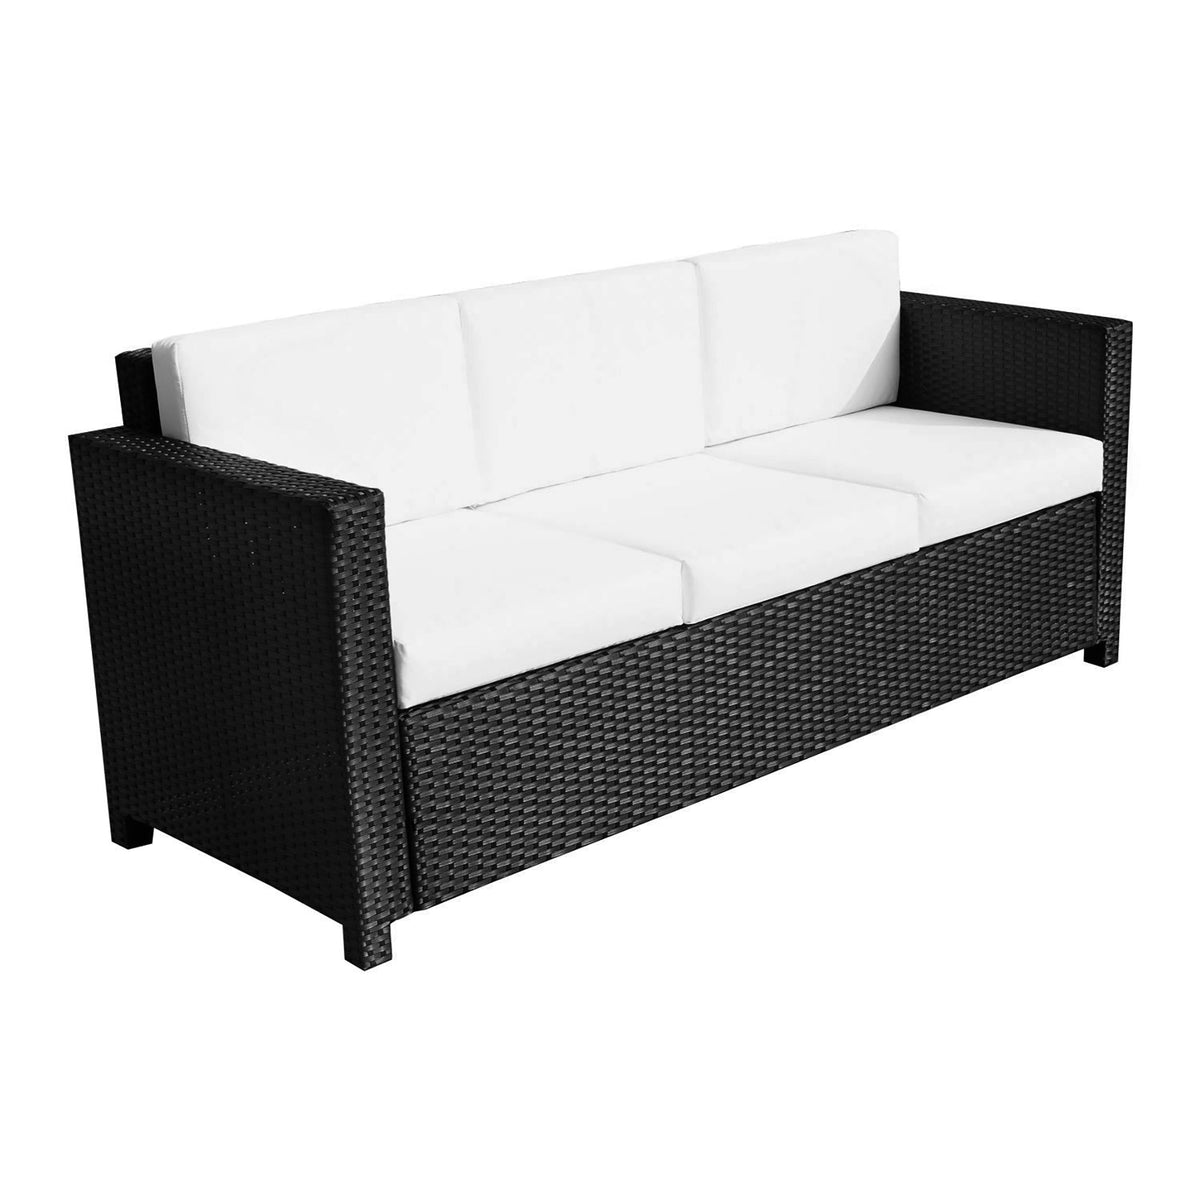 Outsunny Garden Rattan Sofa 3 Seater All-Weather Wicker Weave Metal Frame Chair with Fire Resistant Cushion - Black - TovaHaus